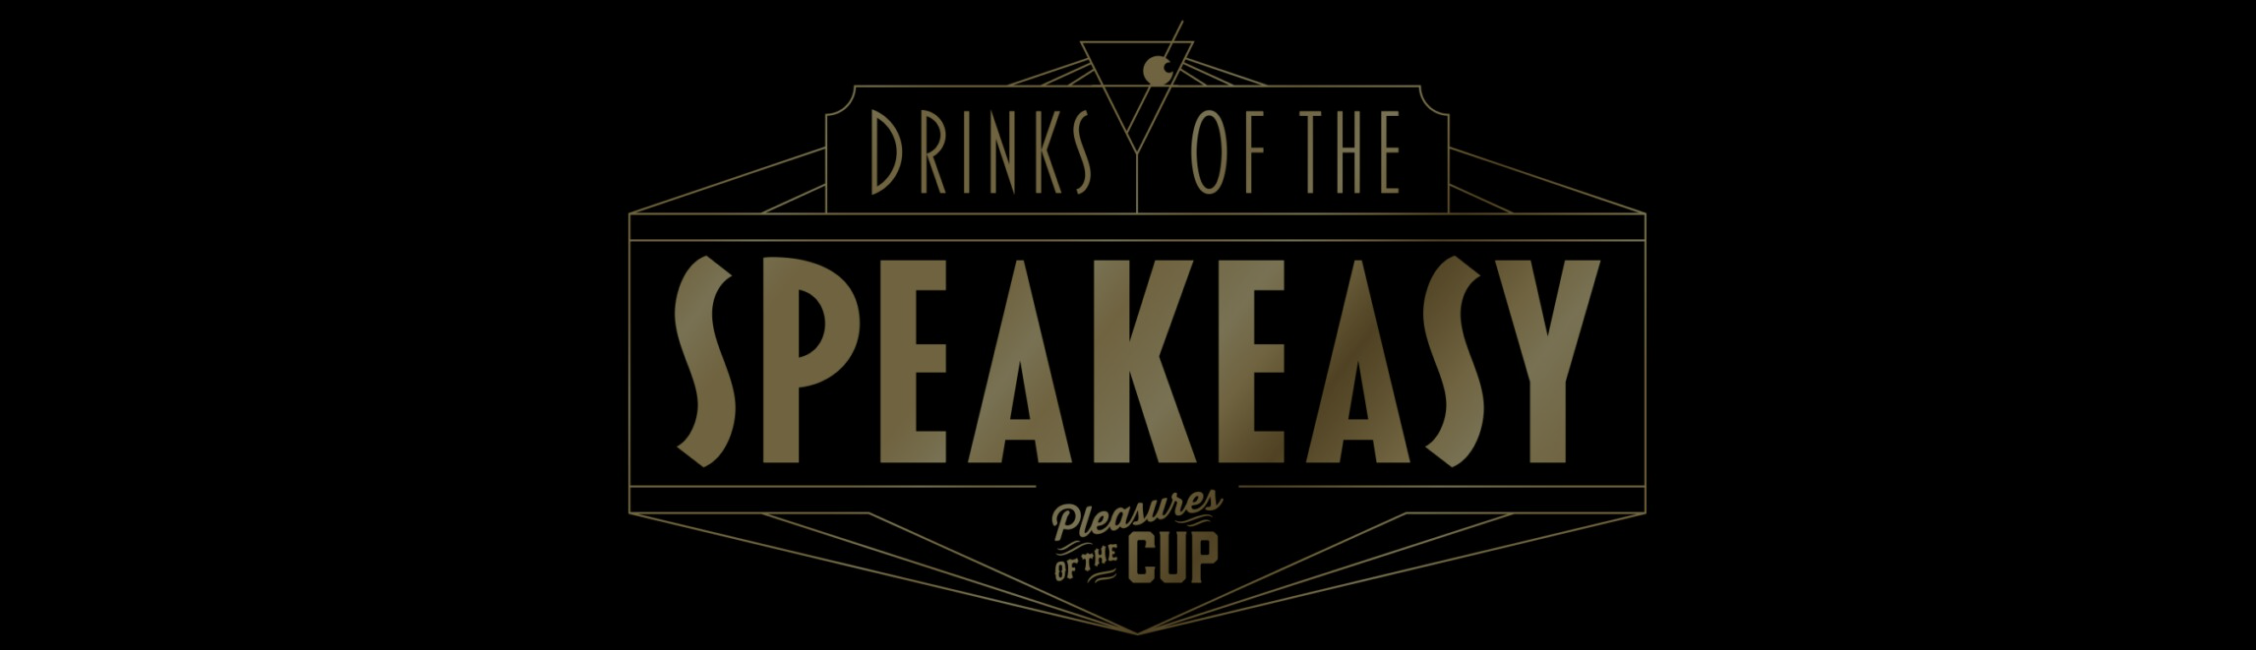 Pleasures of the Cup: Drinks of the Speakeasy at Ohio Village